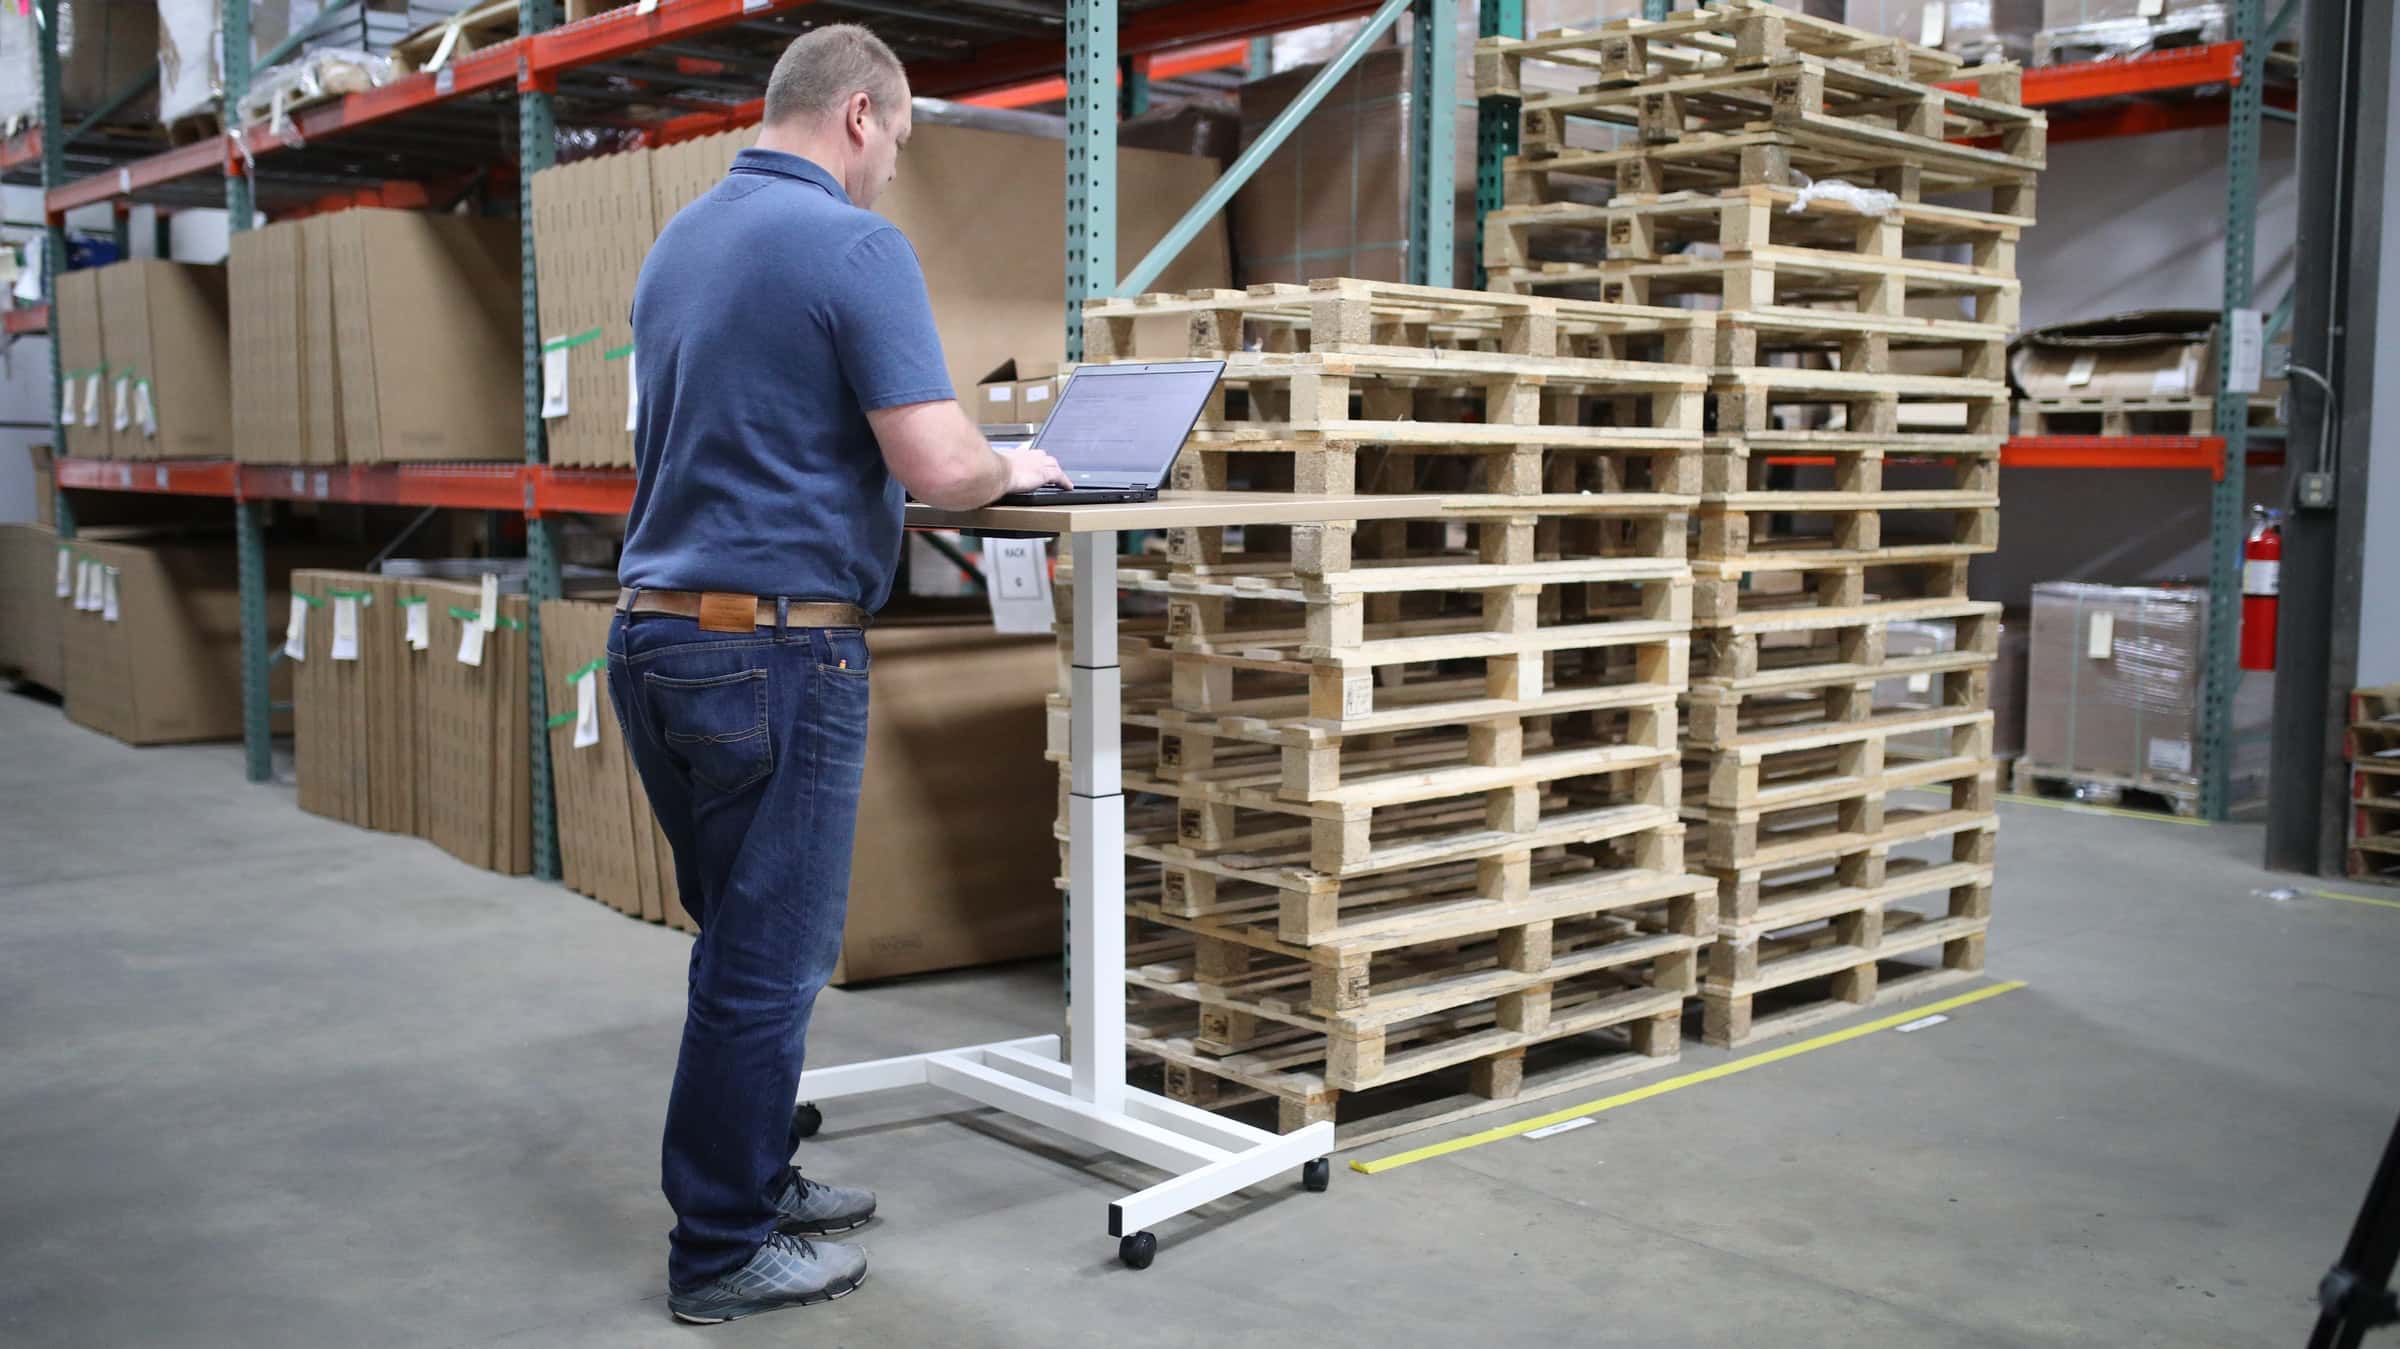 5 Simple Steps to Manage Inventory Effectively